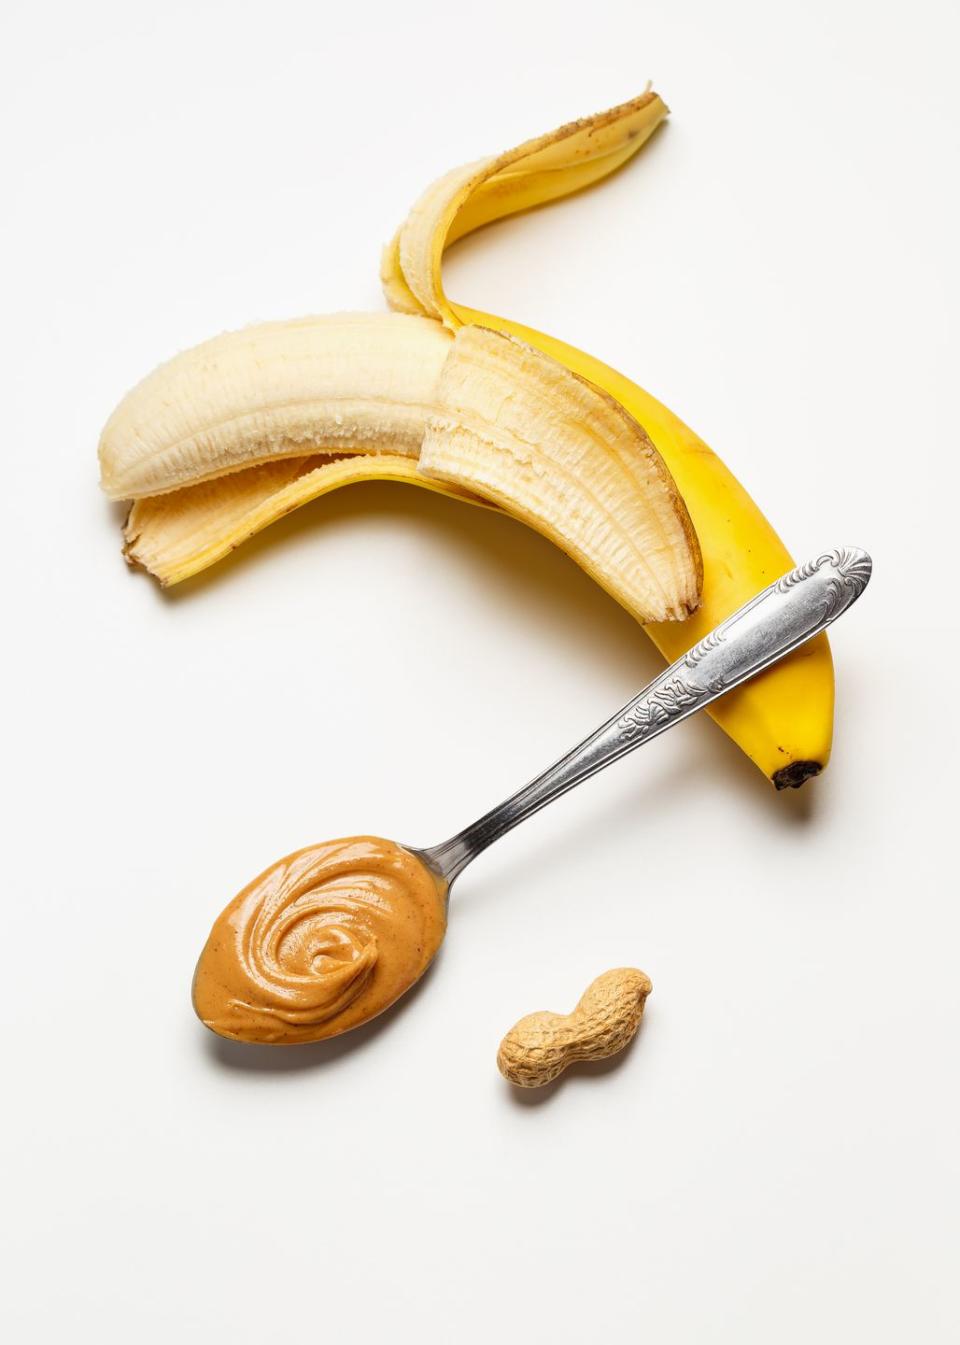 1) Banana and Nut Butter